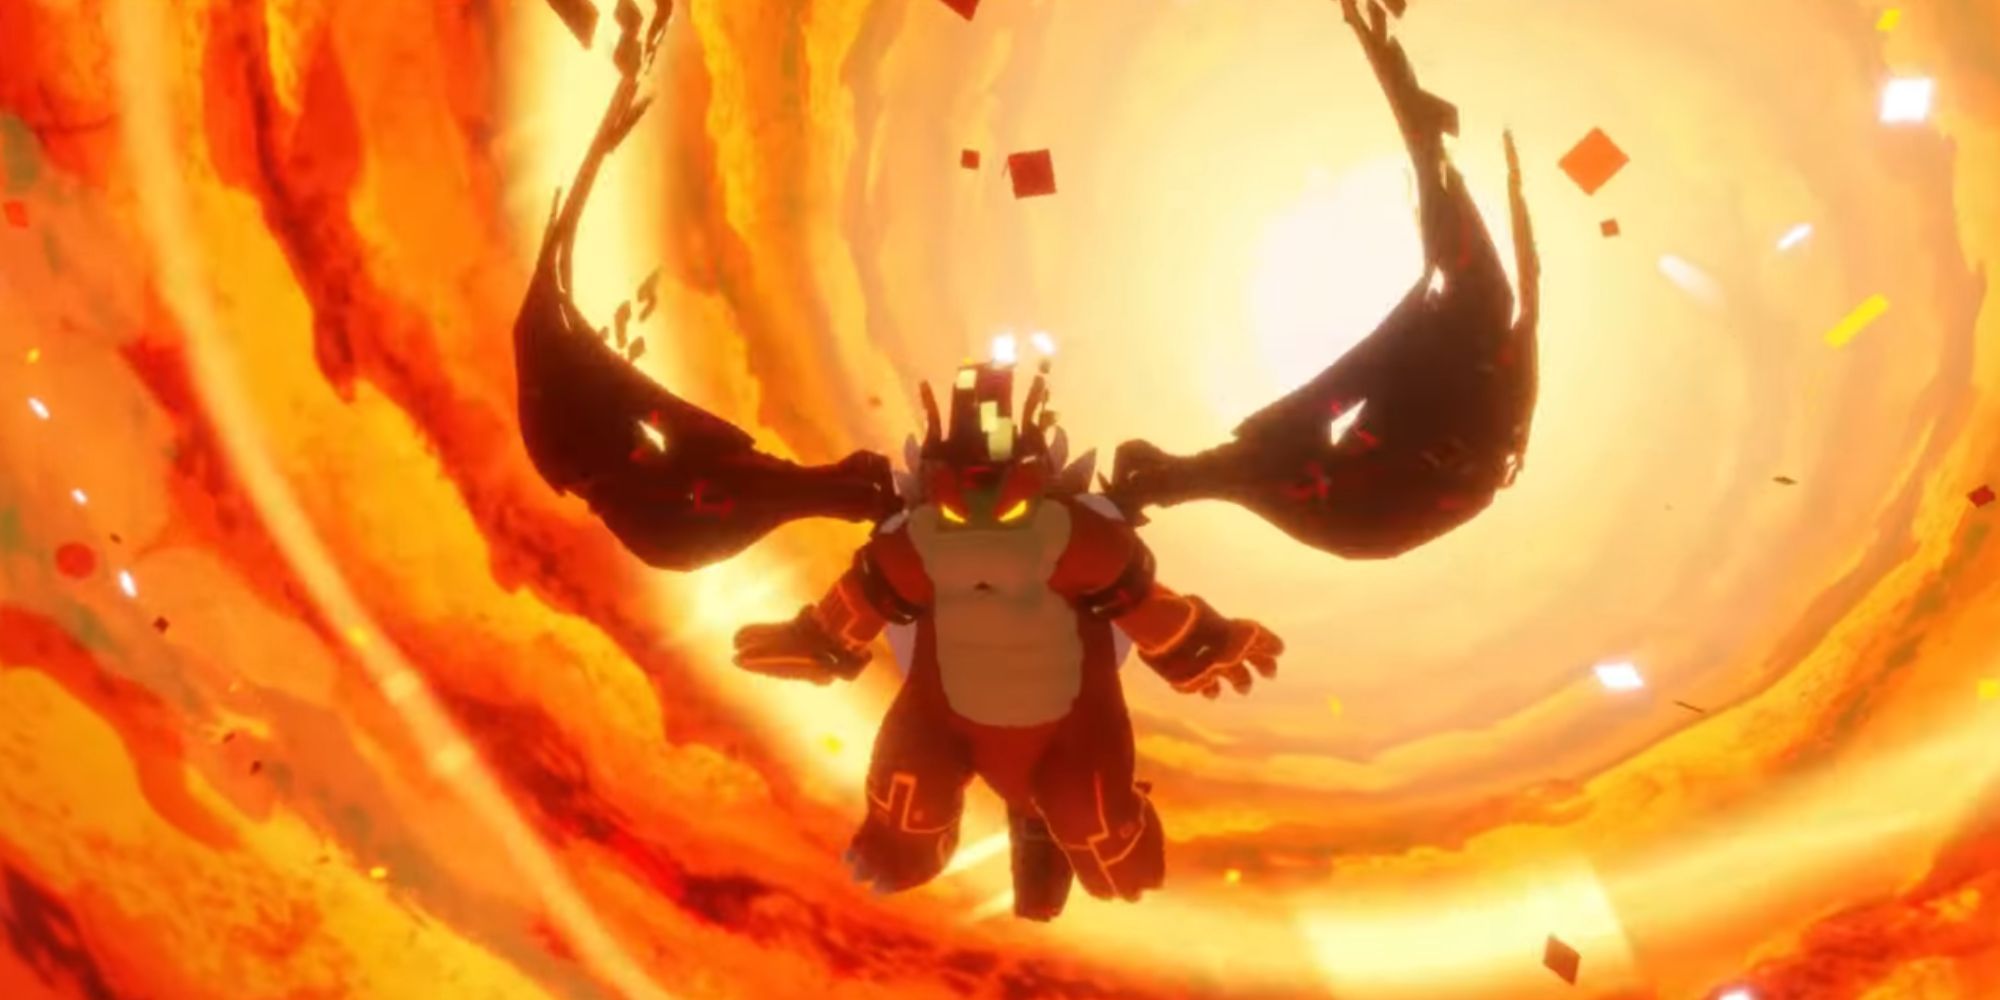 MegaDragonBowser flies in the air in front of a fiery sky